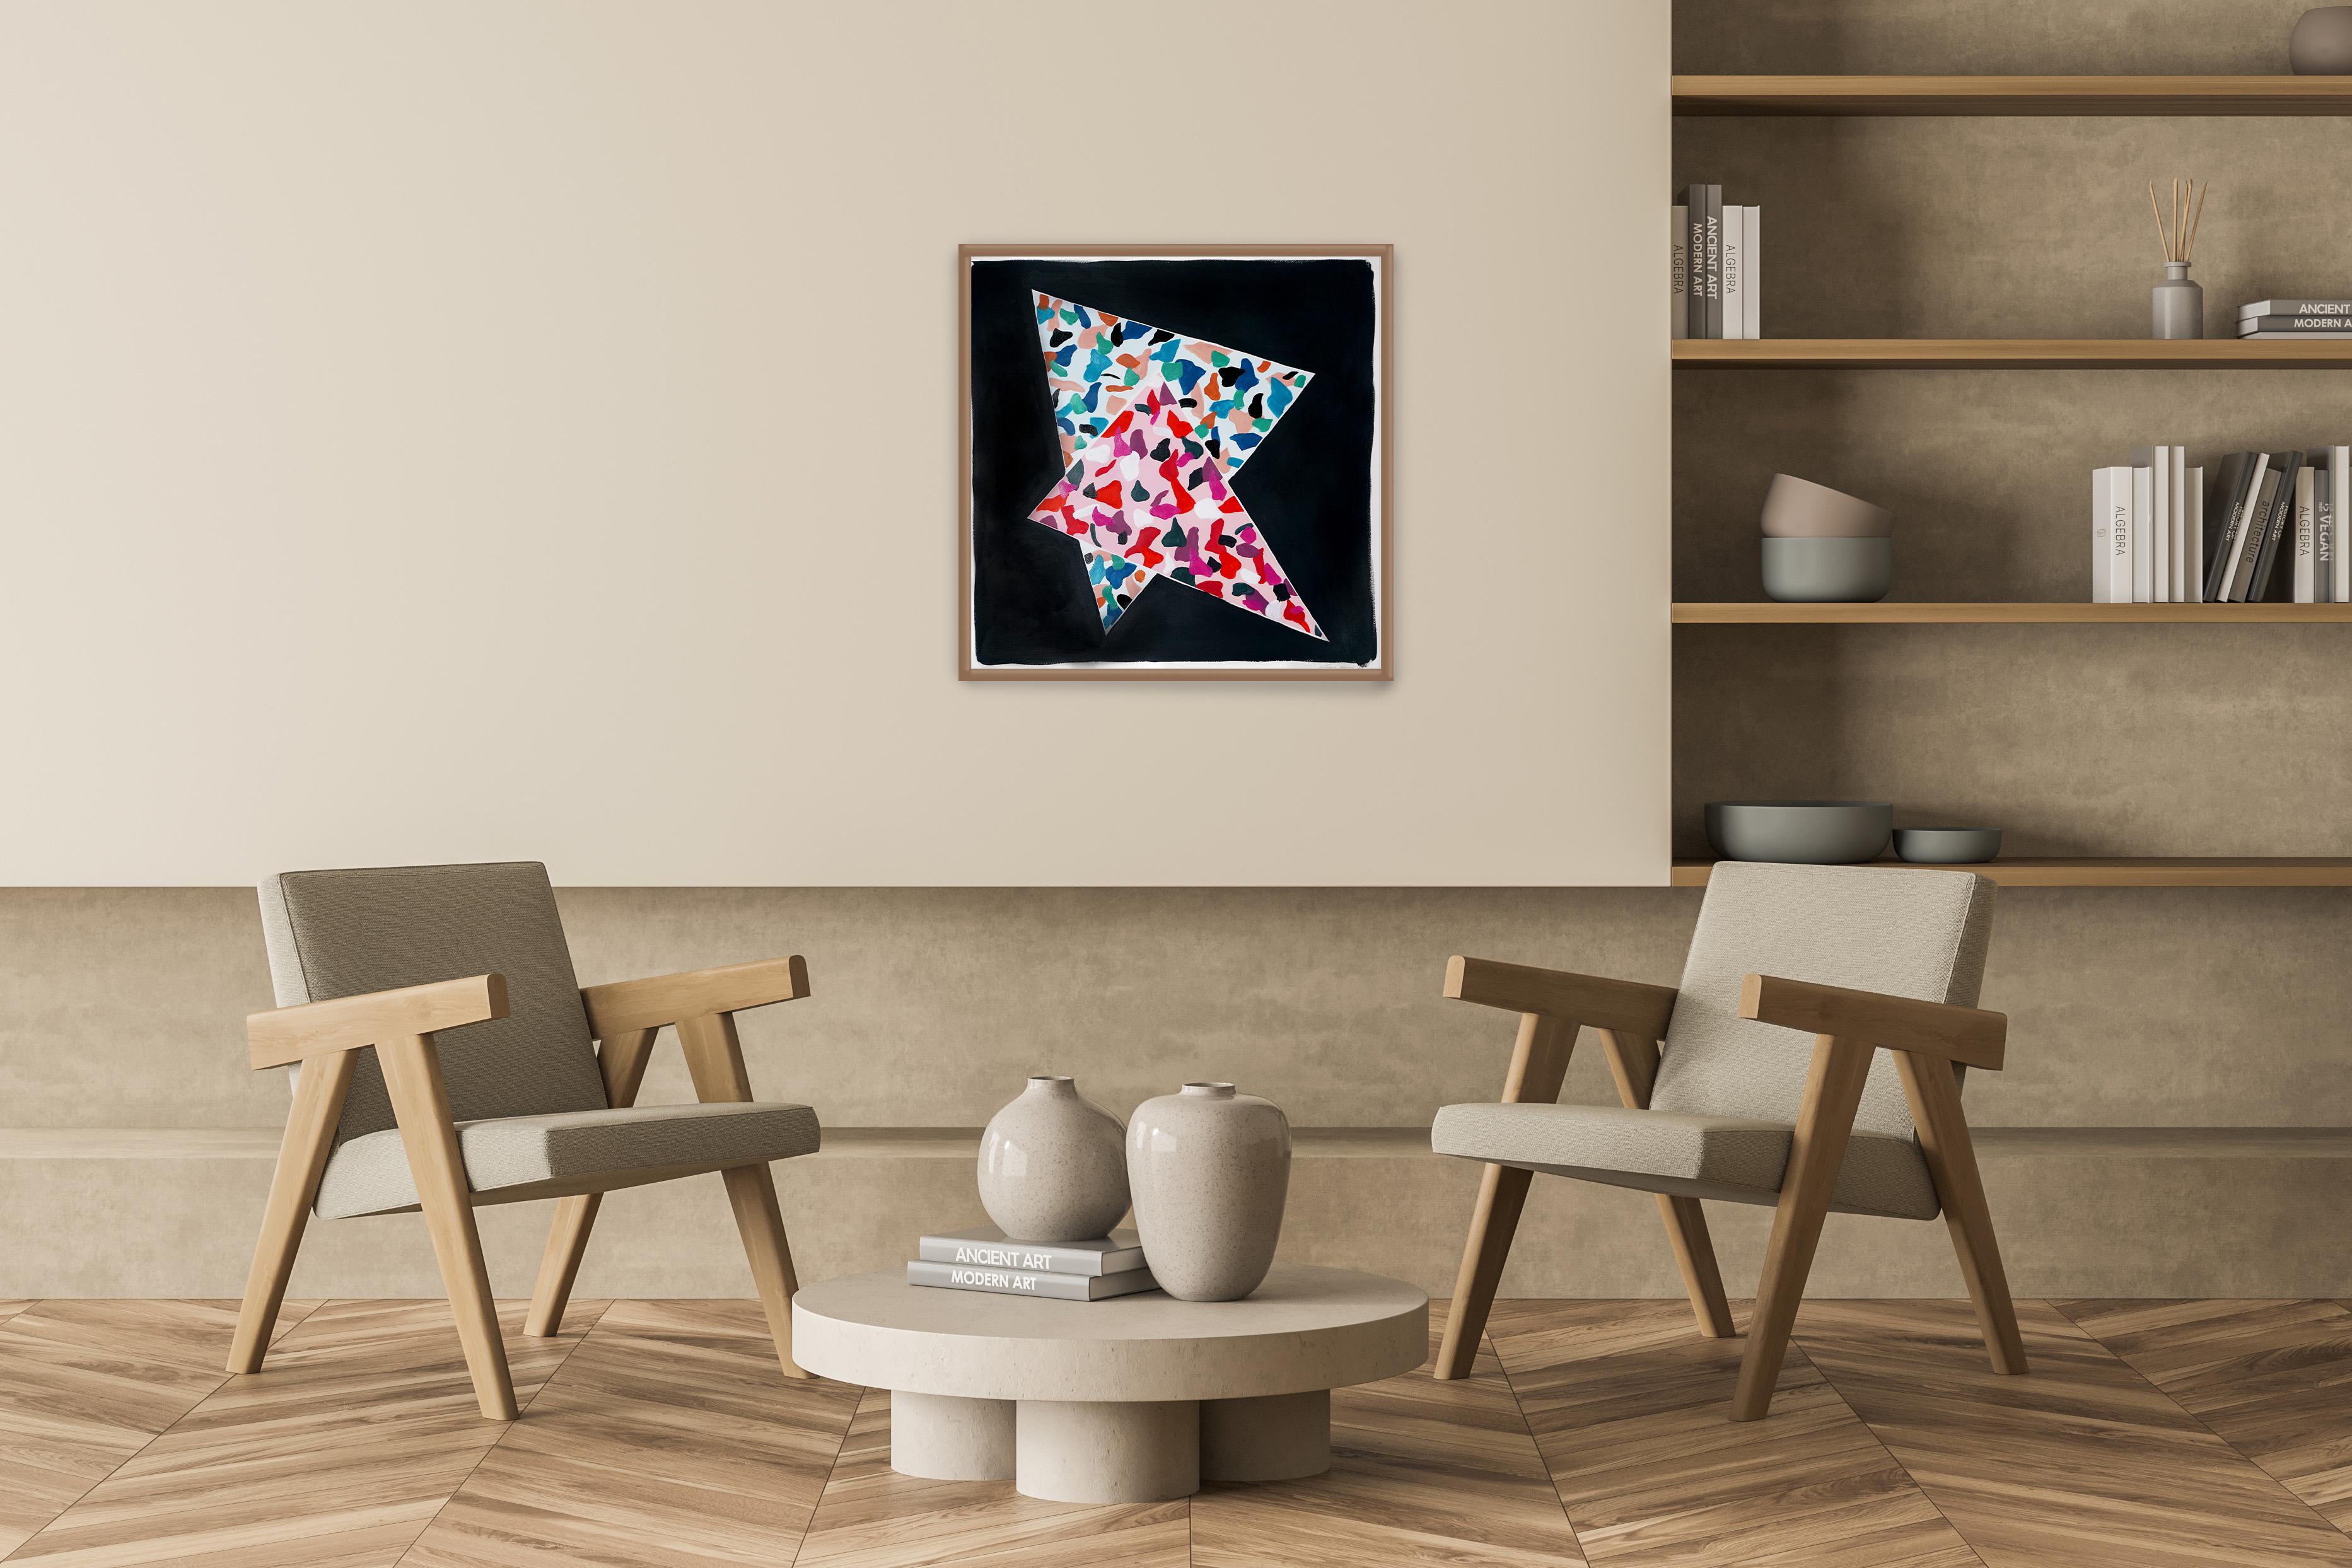 Camouflage Overlap, Triangles on Black Background, Pink Terrazzo Tile Patterns  - Painting by Natalia Roman